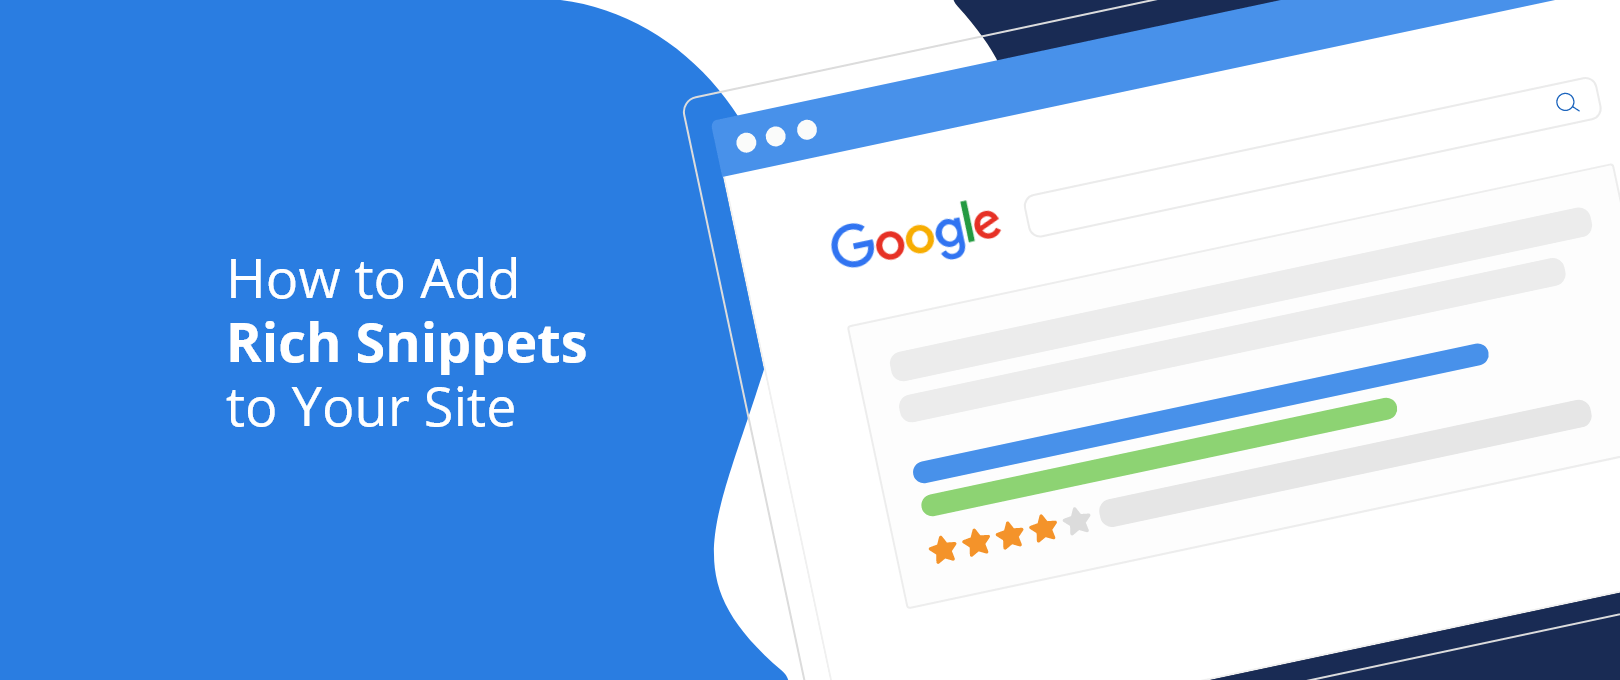 How to Add Rich Snippets to Your Site